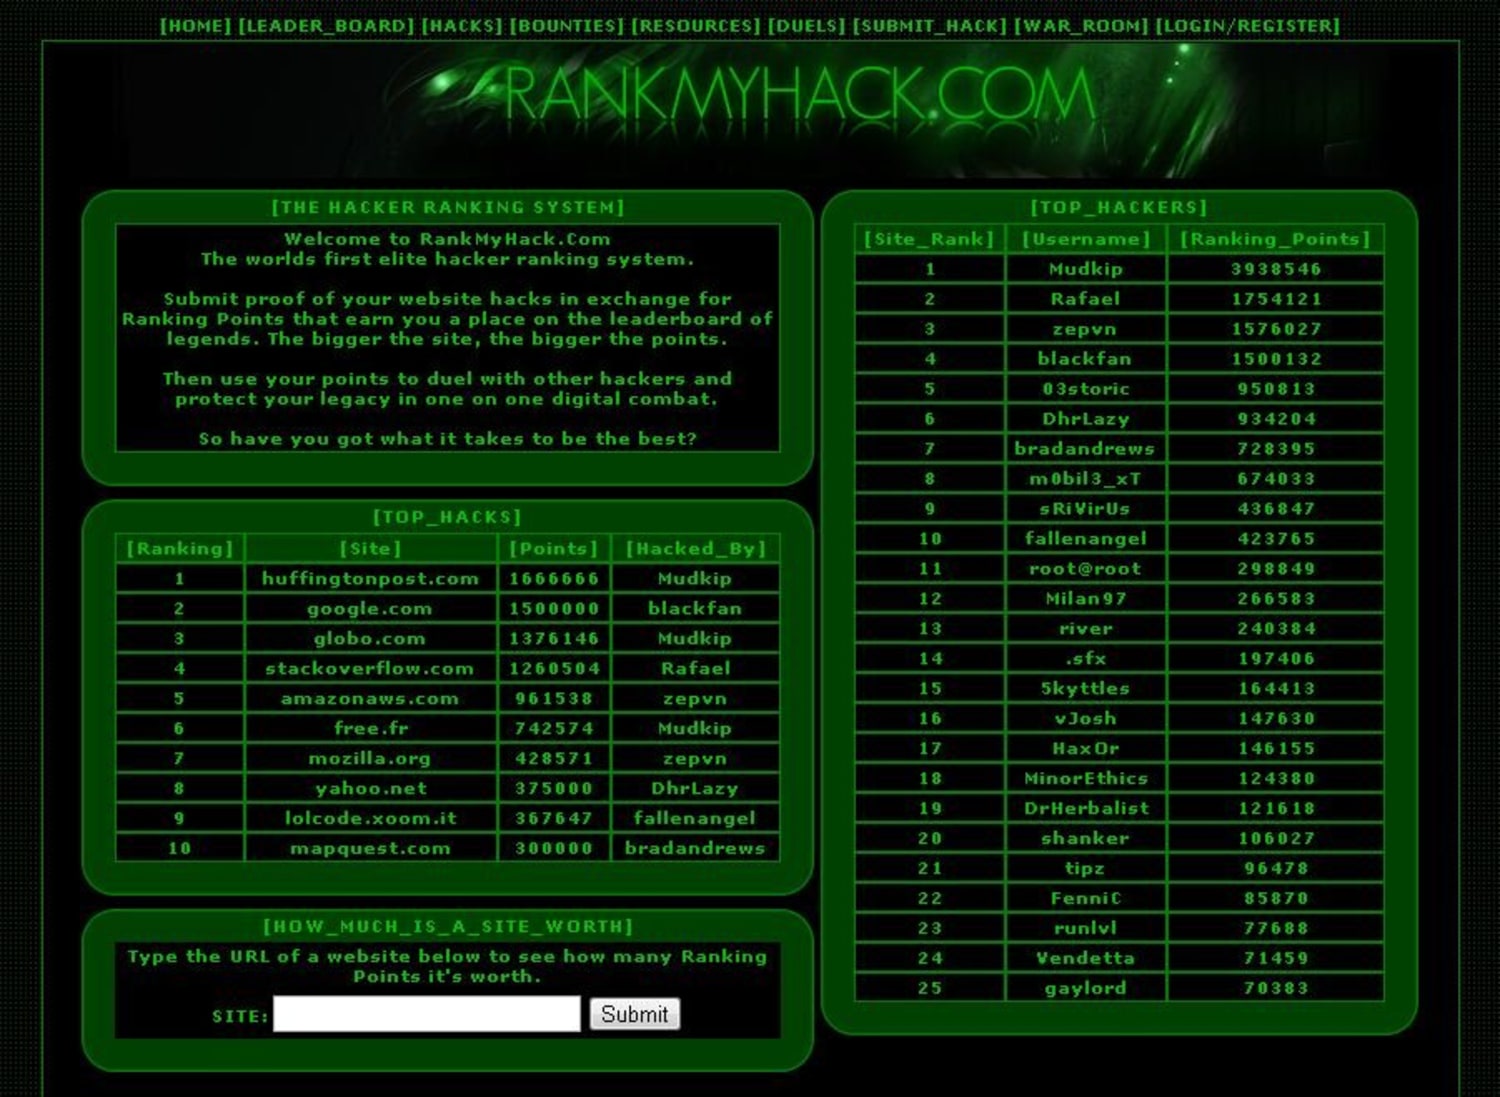 Hackers' bragging rights stake at RankMyHack.com